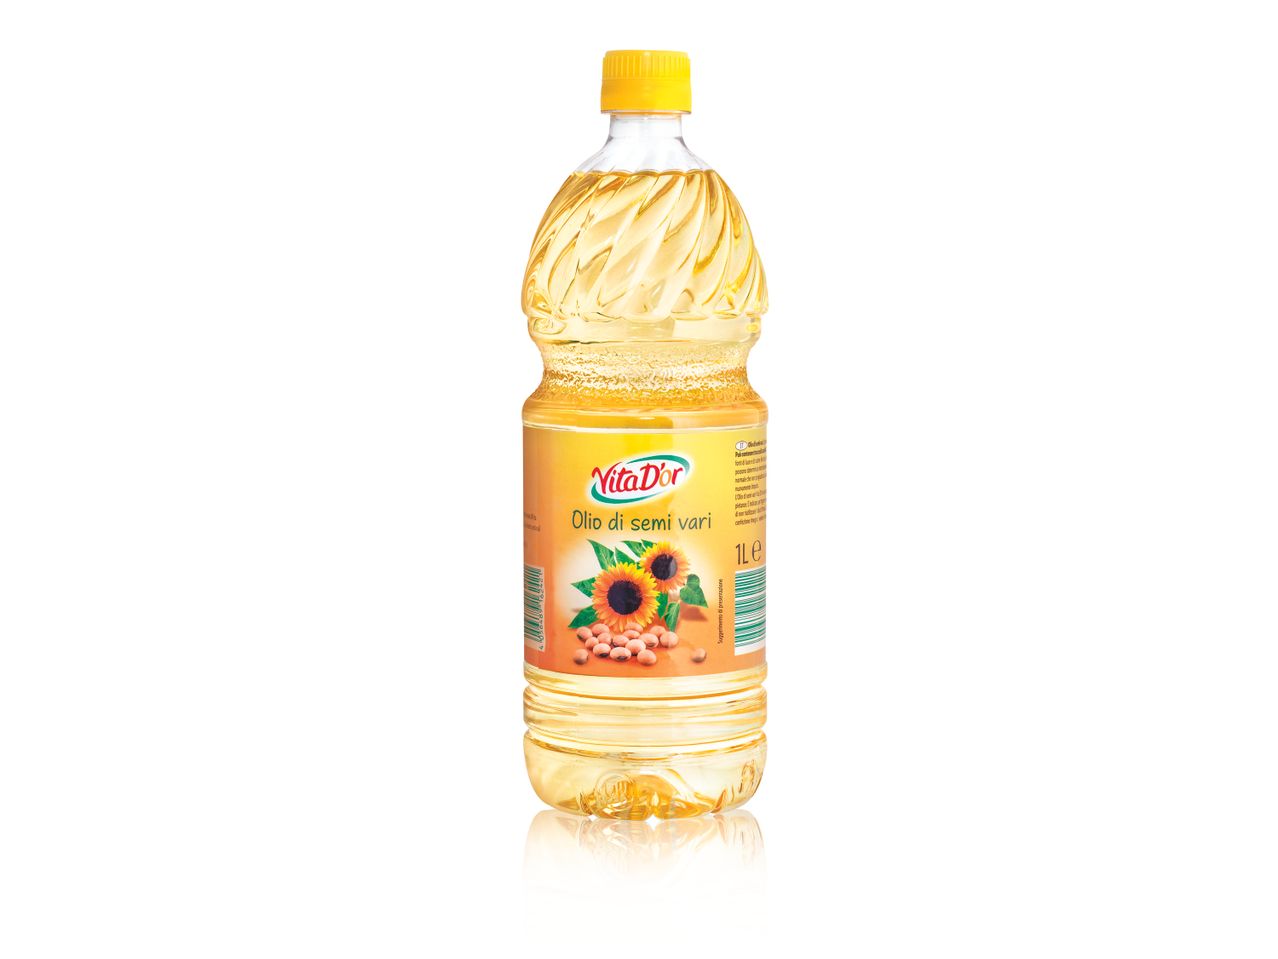 Go to full screen view: Sunflower and Soy Oil - Image 1